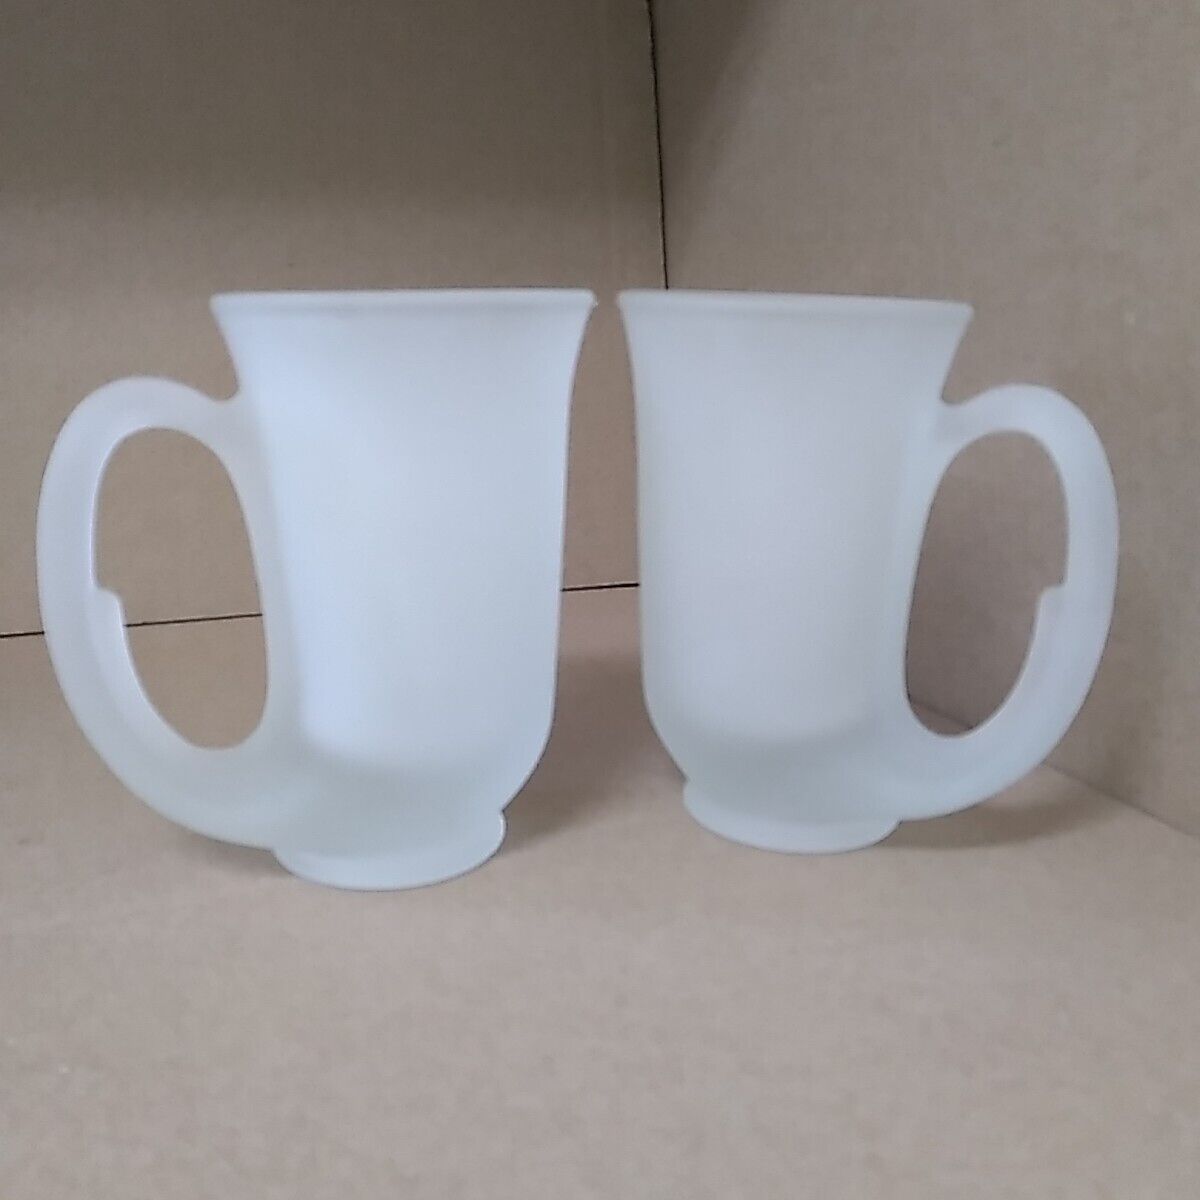 Vintage Tiara Frosted Glass Hunter Horn Style Mugs Set Of 2